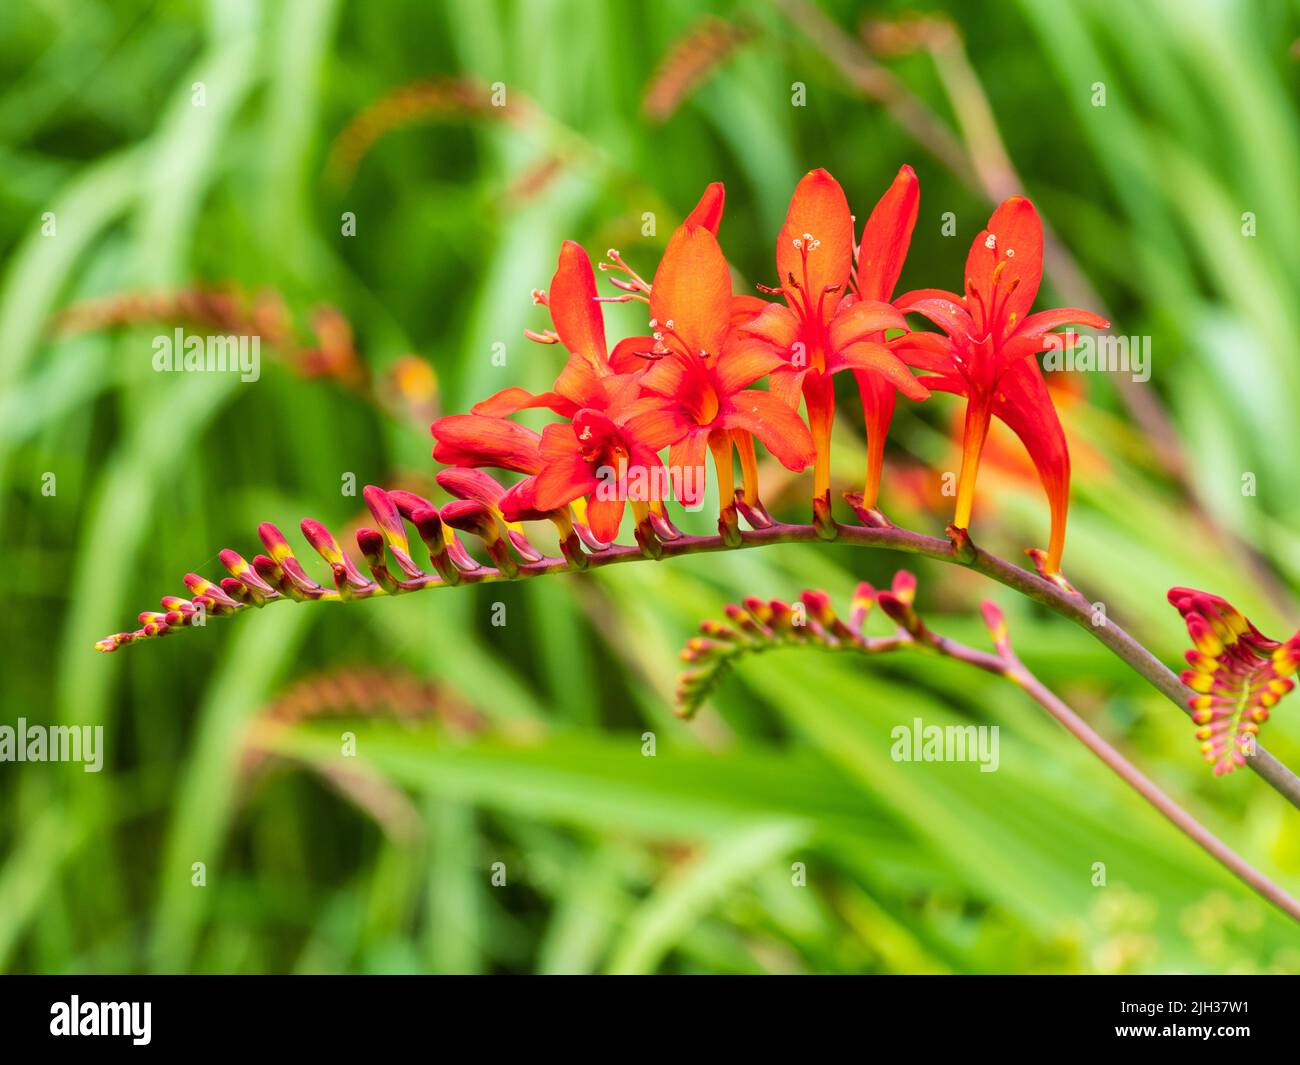 Arching flower head of the July blooming hardy perennial, Crocosmia masonorum 'Lucifer' Stock Photo